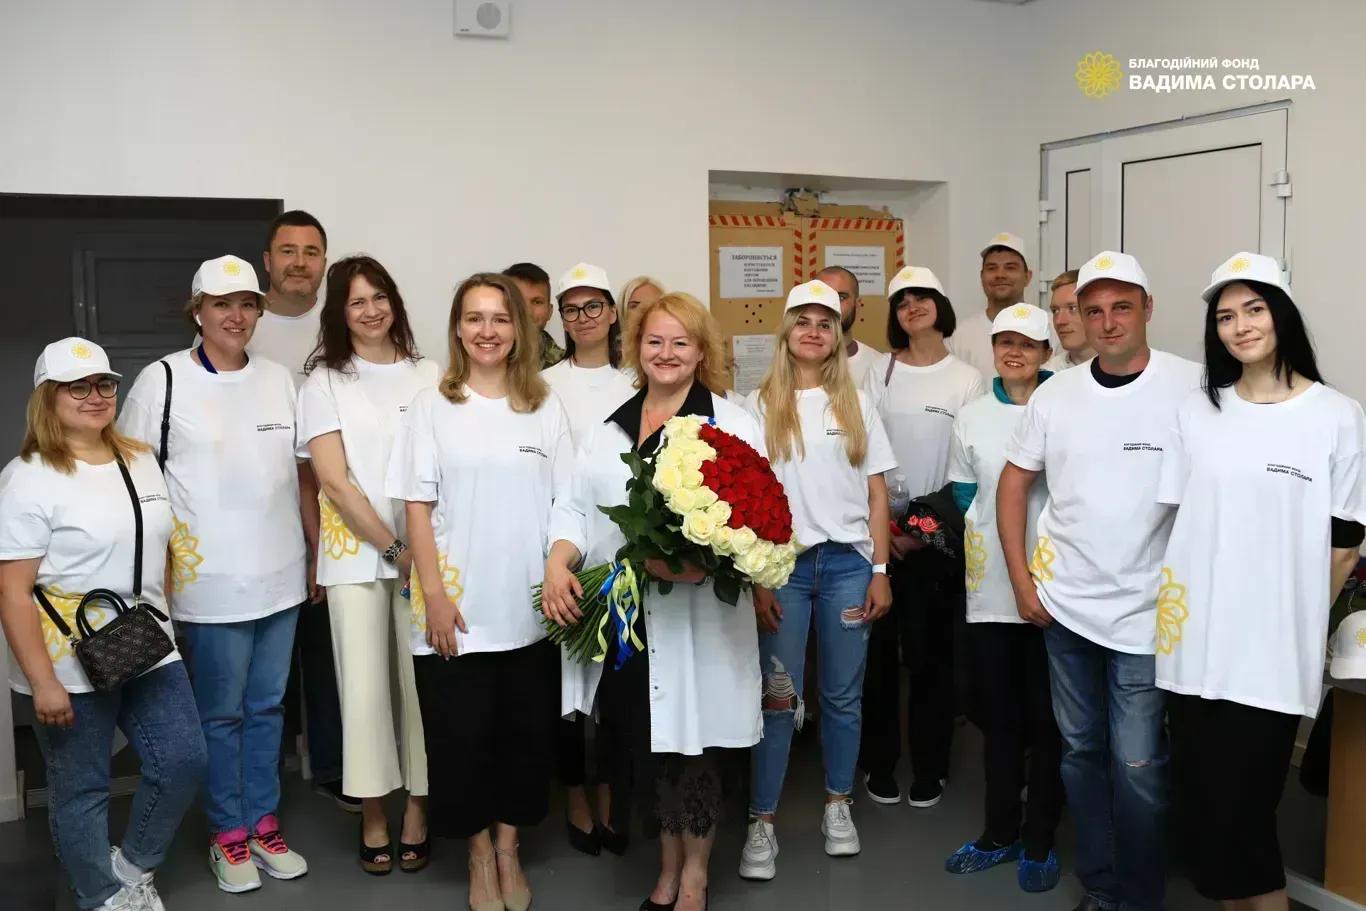 In Kyiv, volunteers held a blood donation campaign dedicated to Donor Day